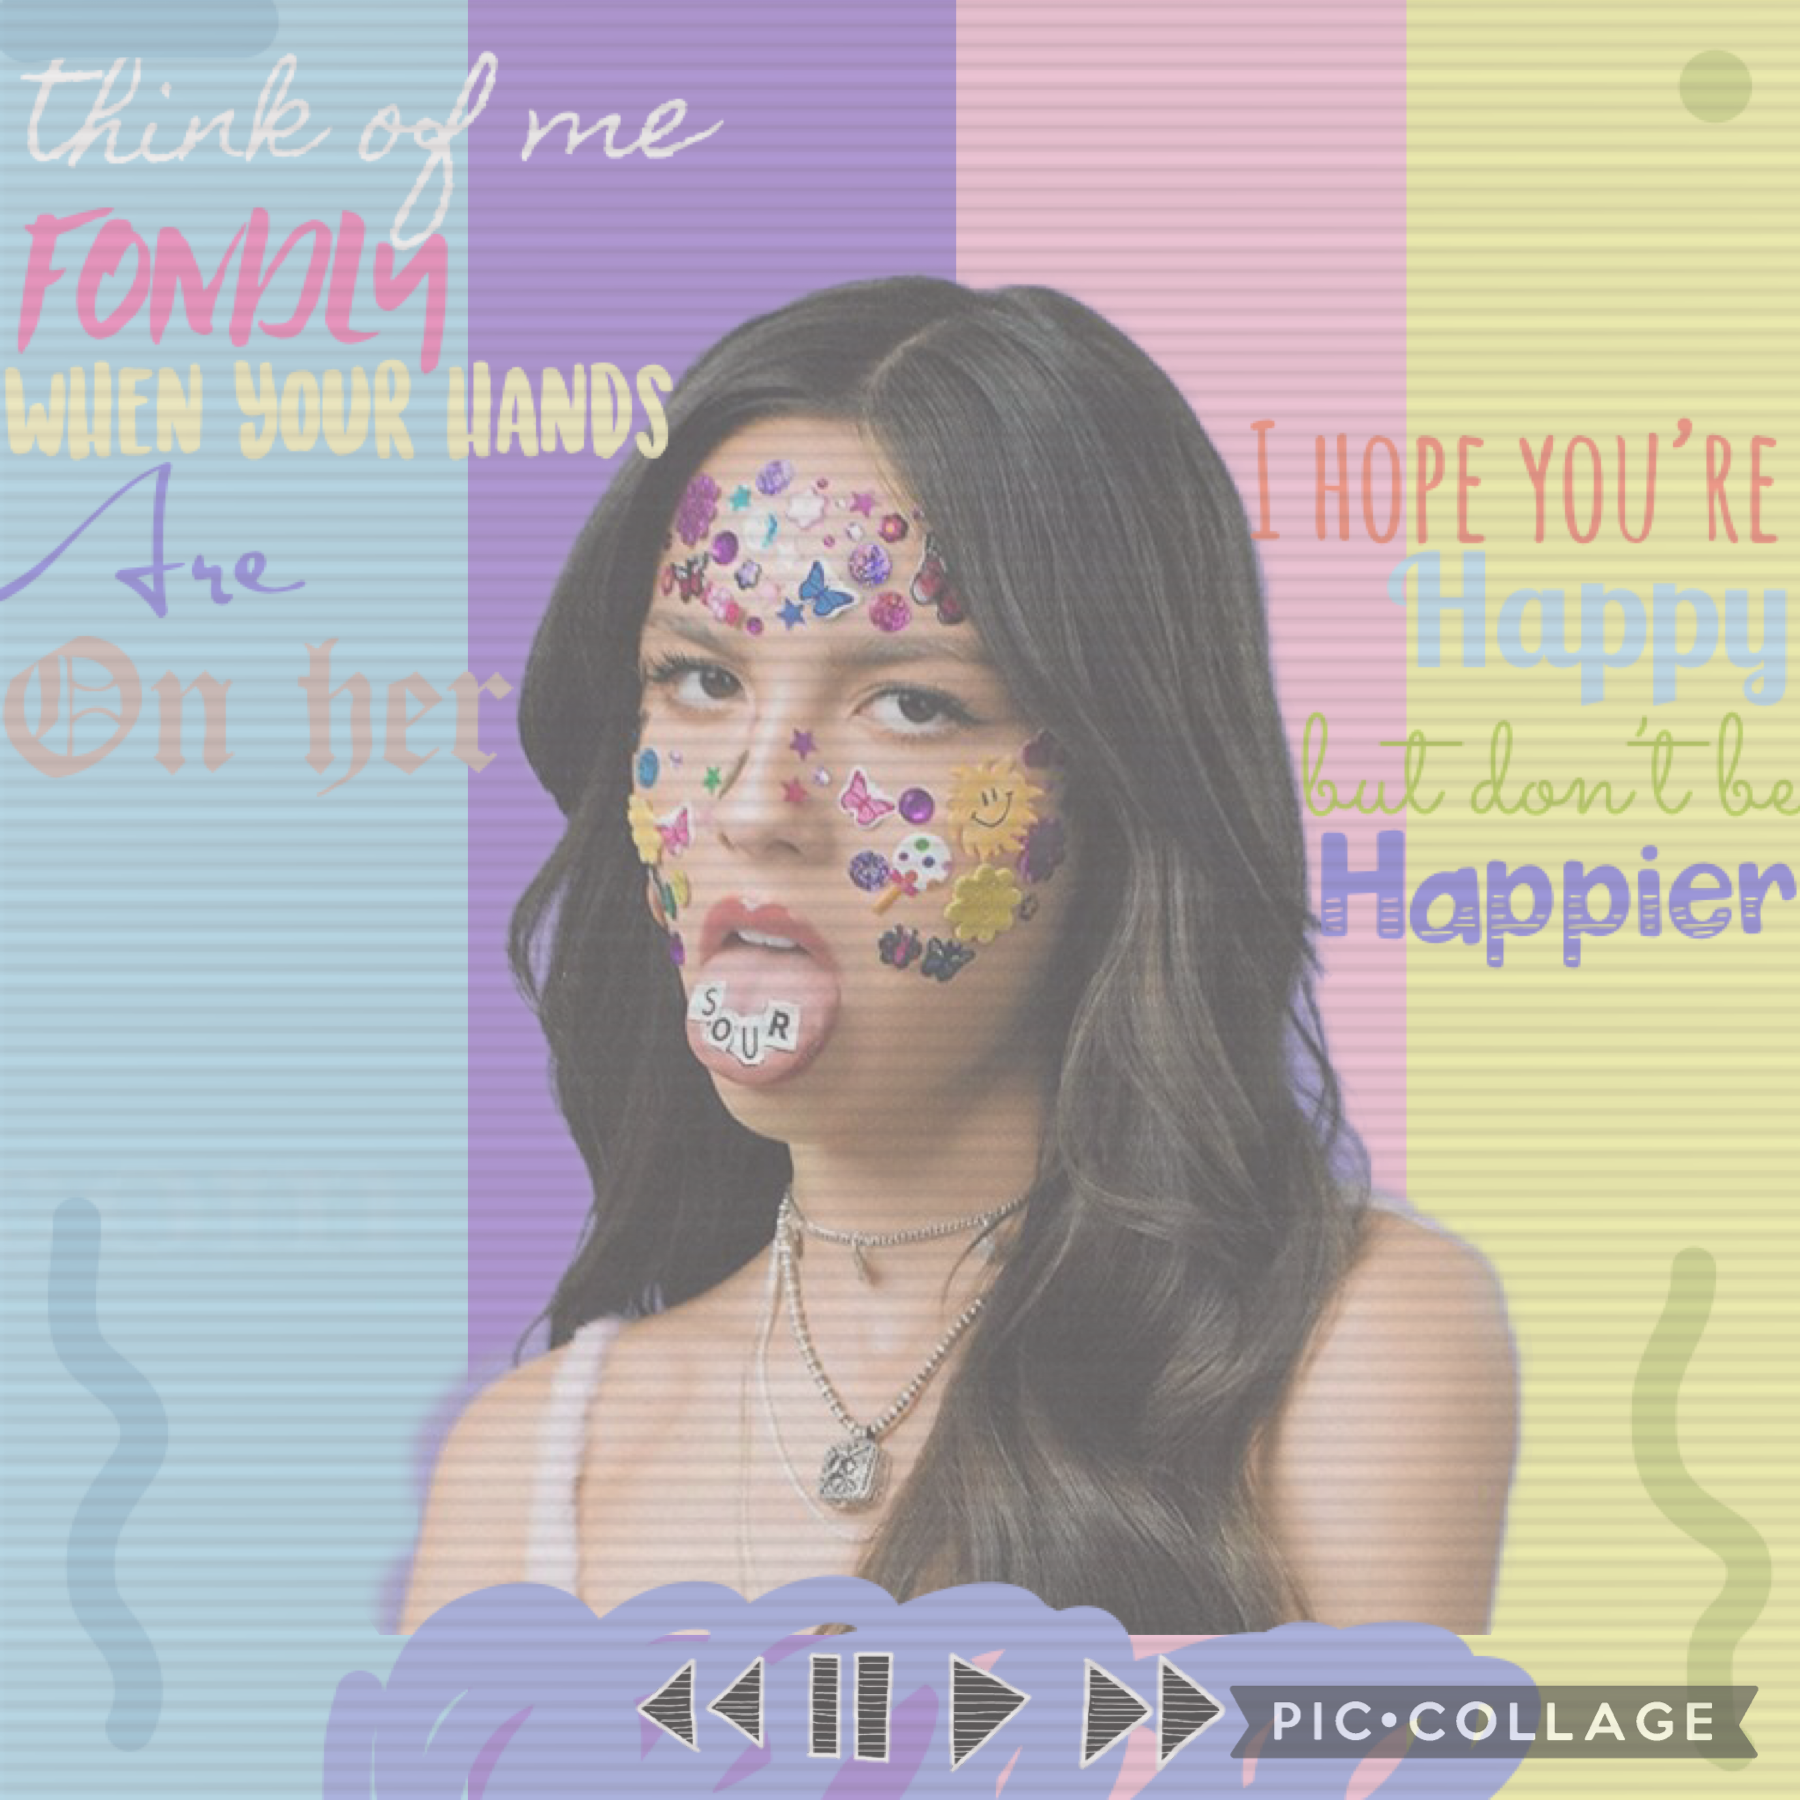 🌻Happier🌻

~this is my favorite song on the album; i think this might be my last olivia rodrigo collage for a little~
Next: •Ariana Grande•